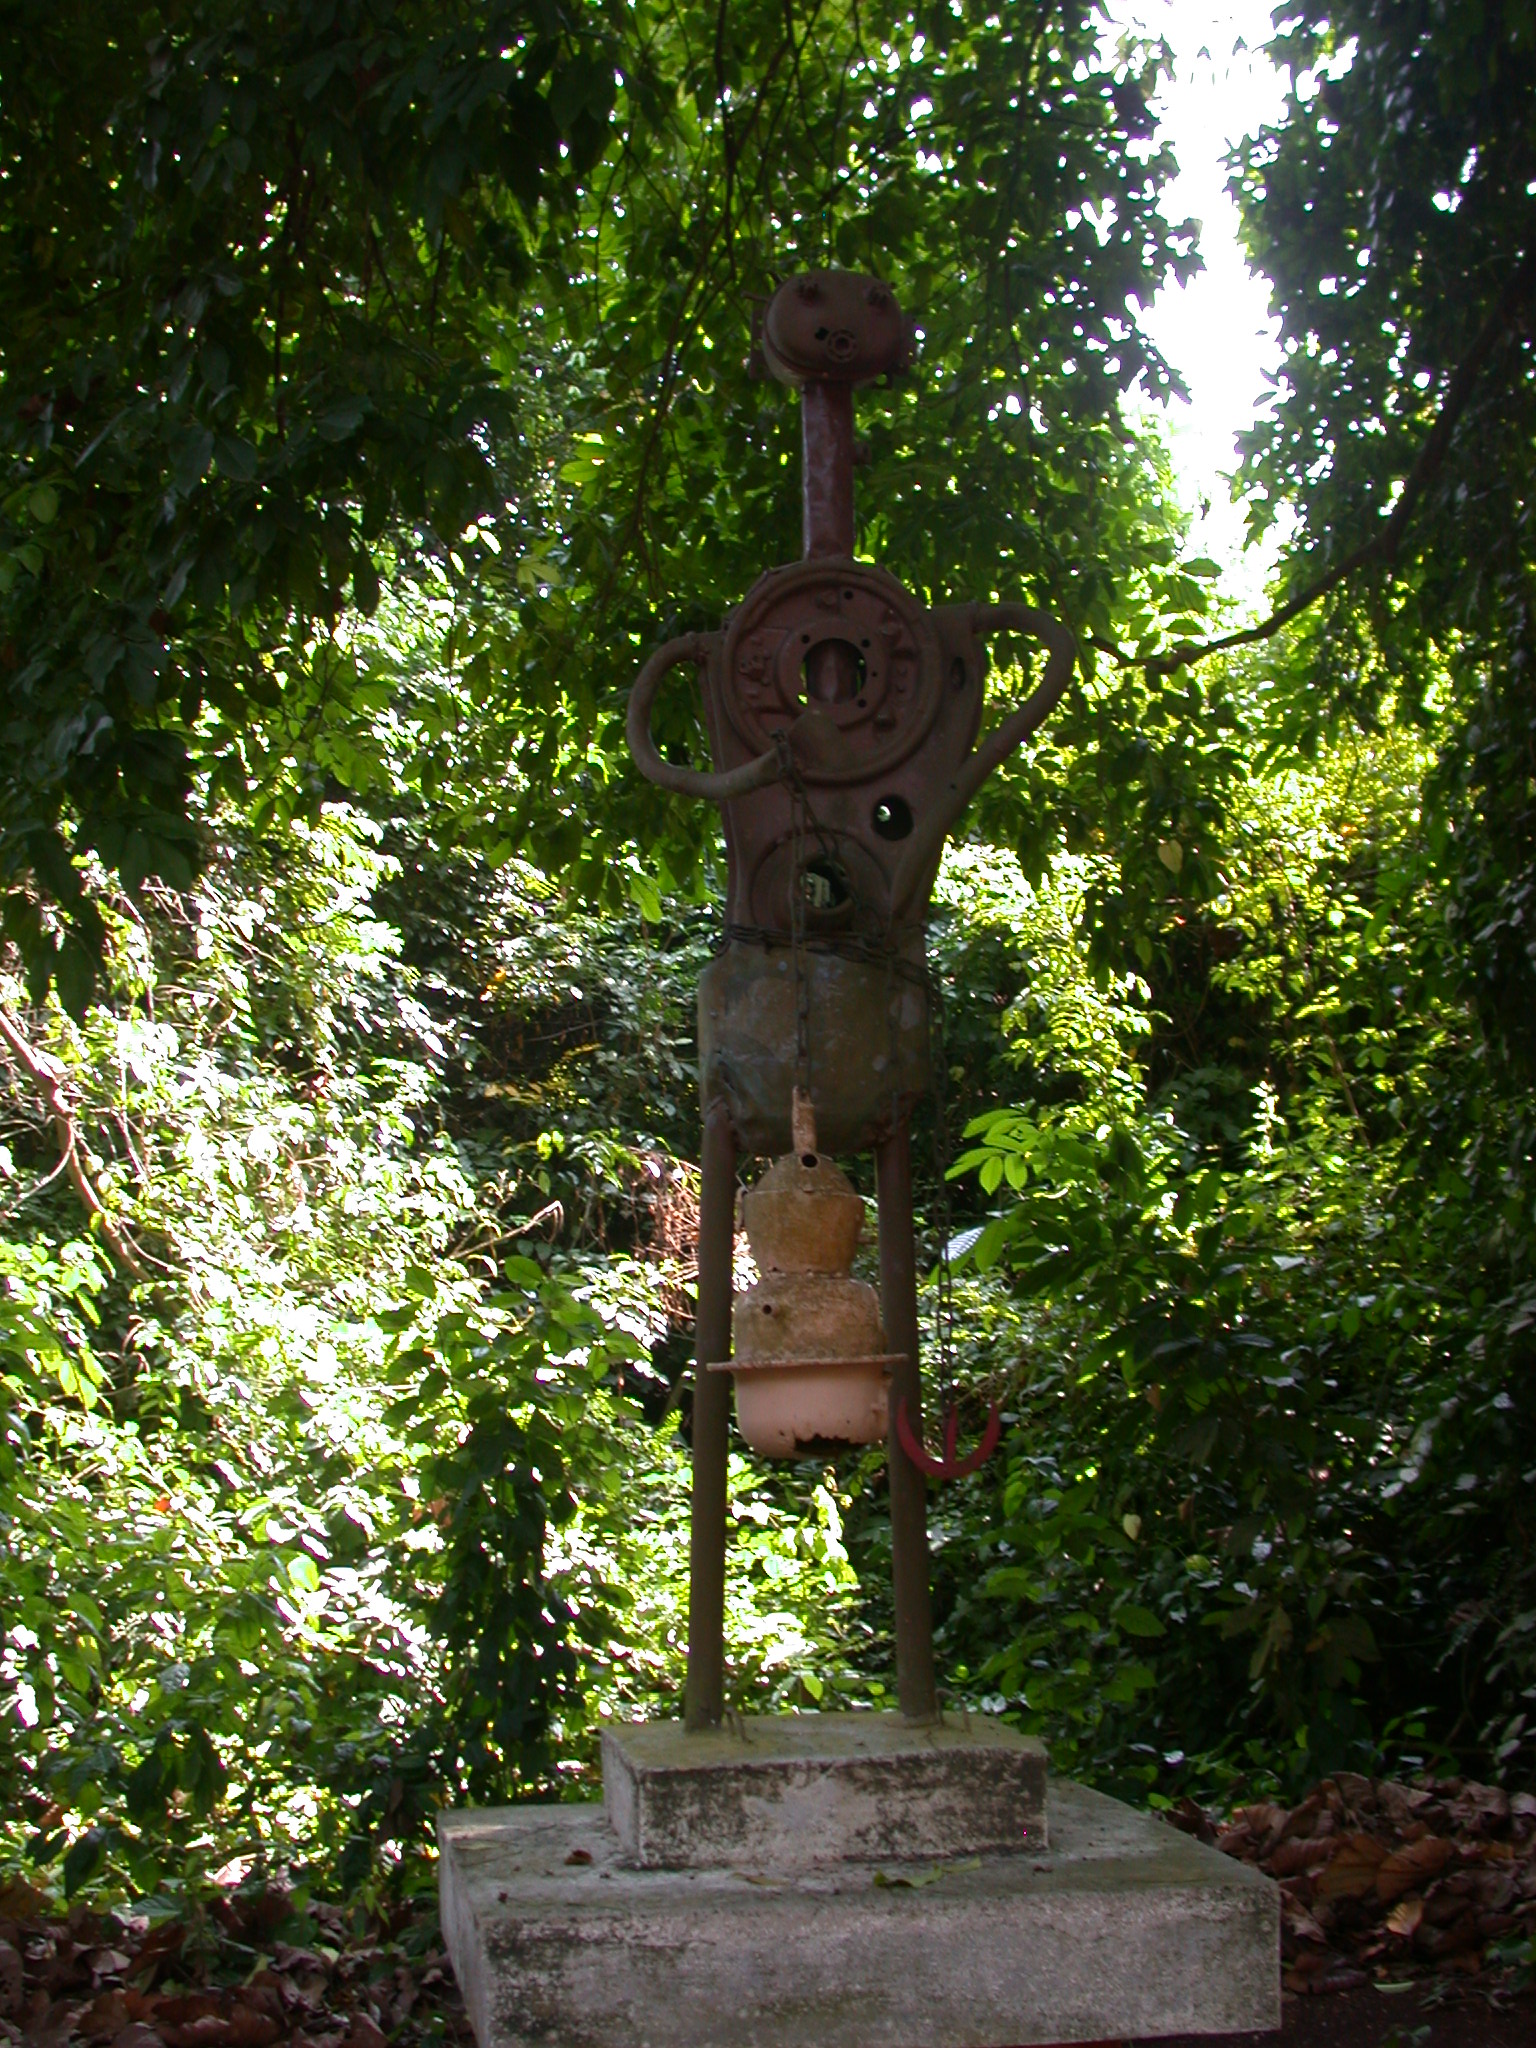 Sculpture of Priest Holding Xeviosso-Shaped Censer, Kpasse Sacred Forest, Ouidah, Benin